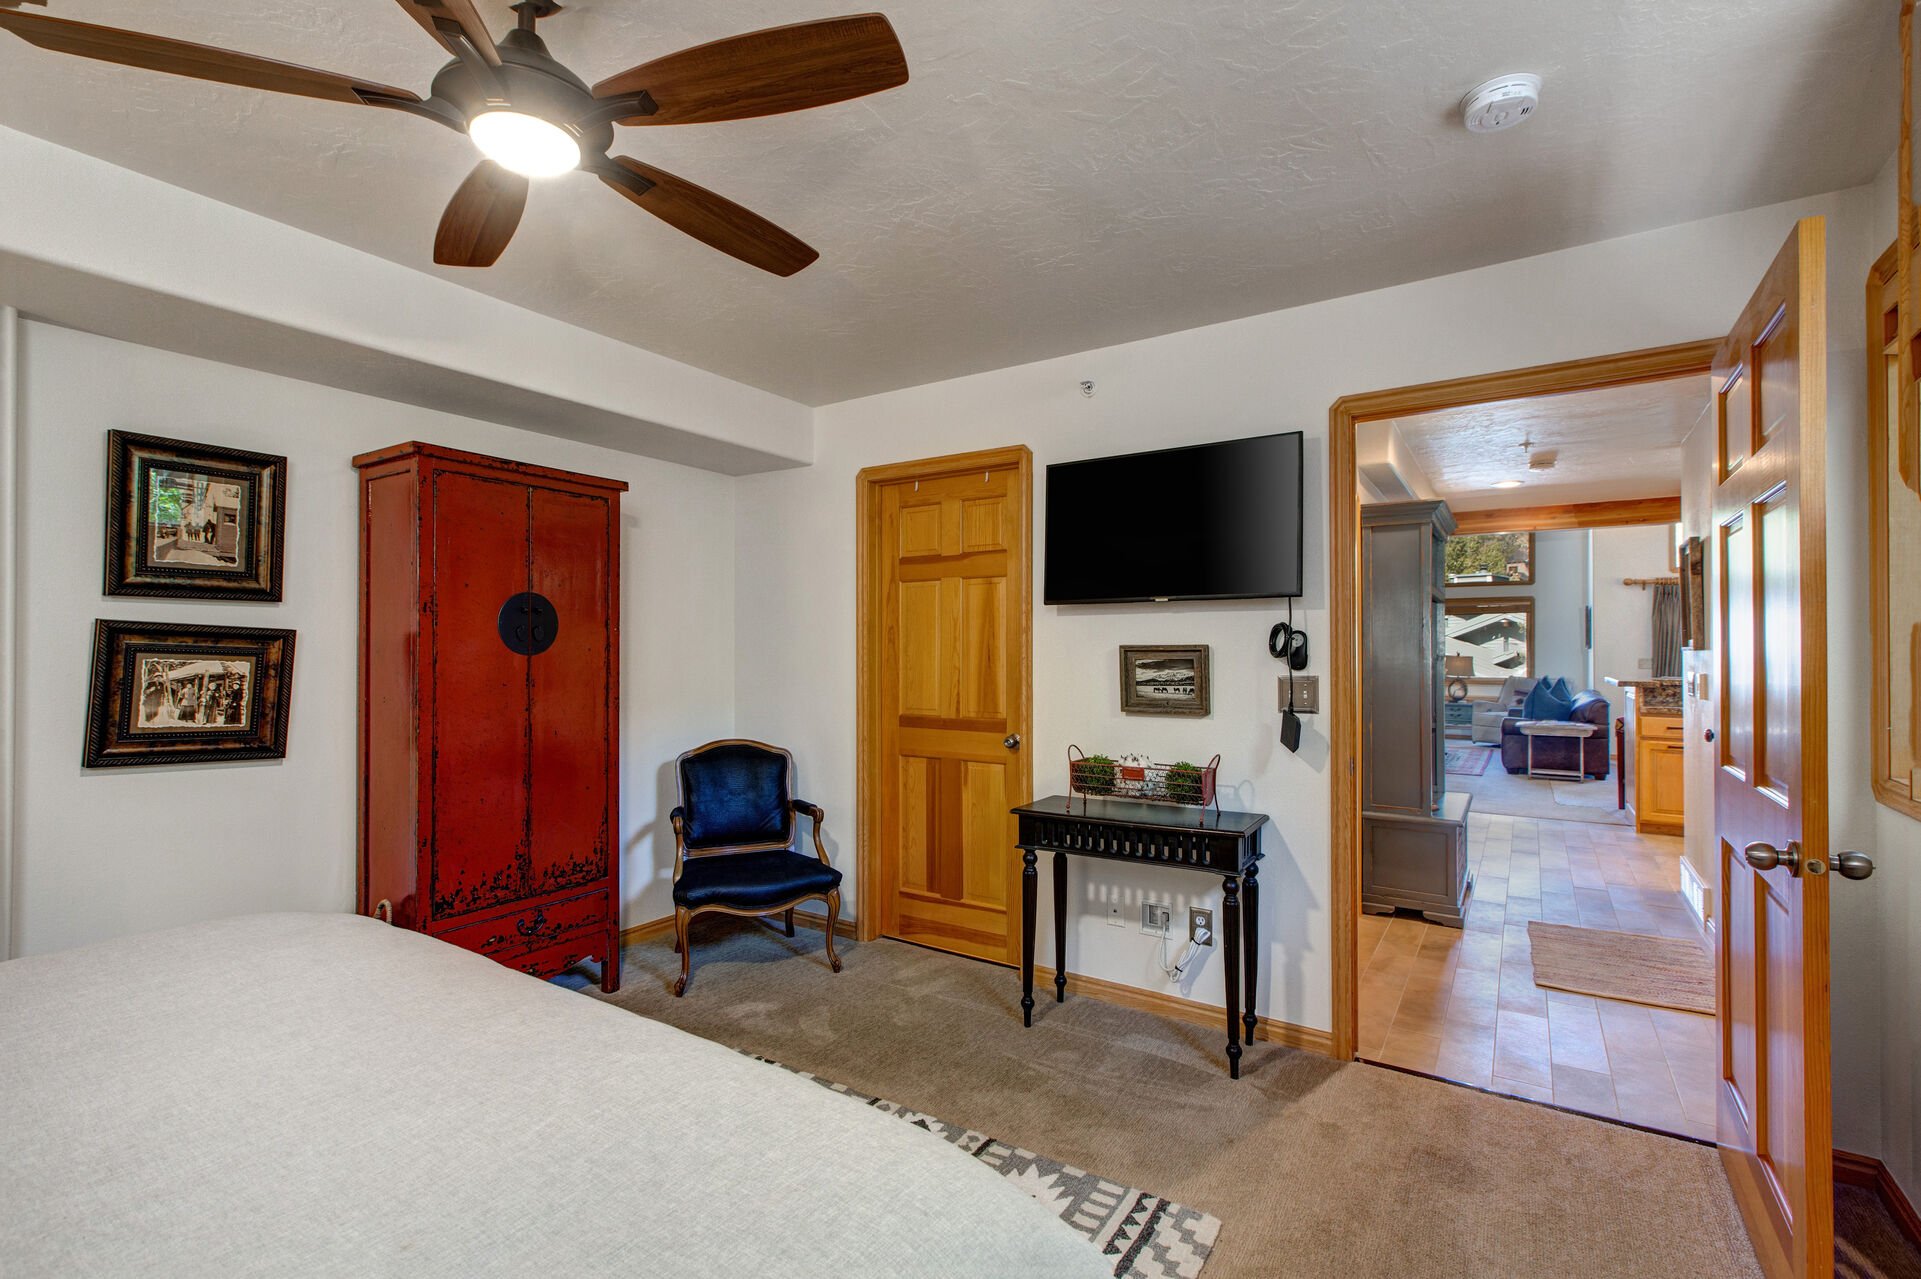 Main Level Master Bedroom with a King Bed, Smart TV, and Private Access to a Full Shared Bath